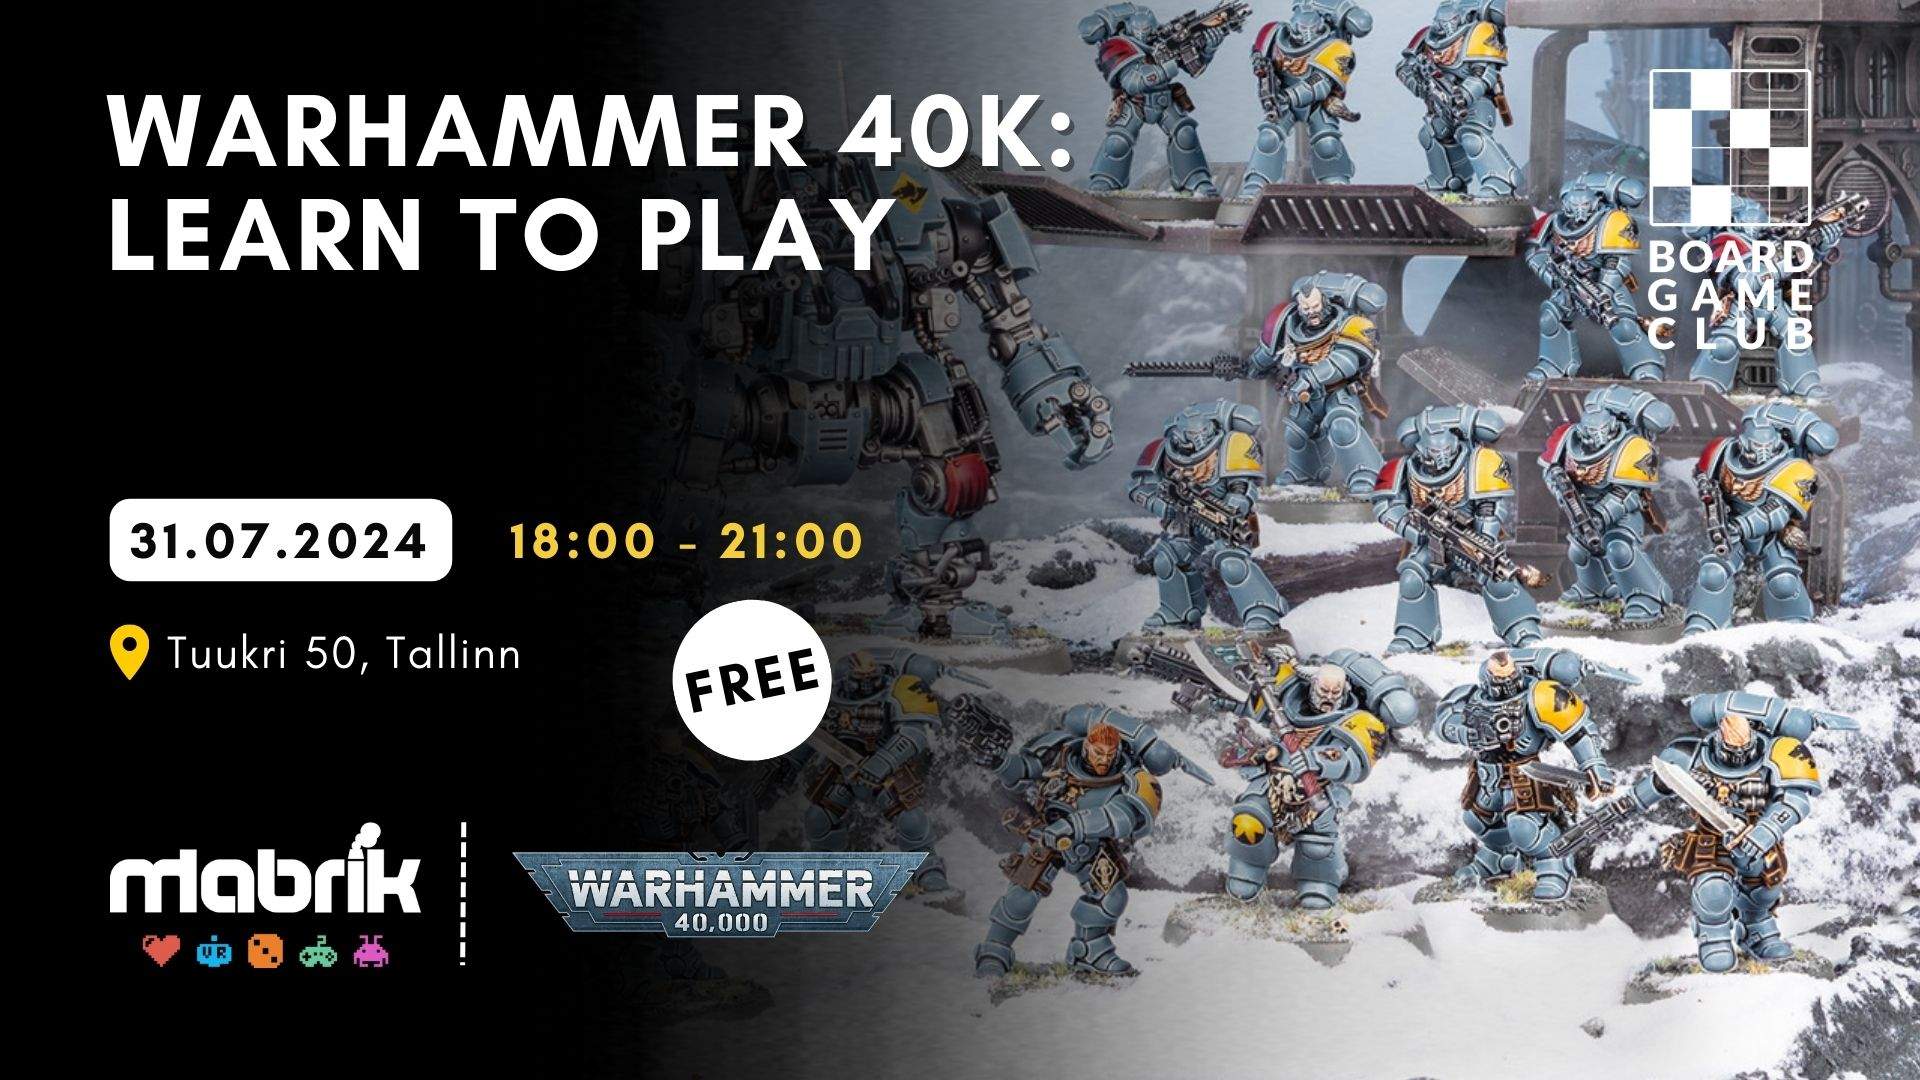 Events - 31.07.2024 - Warhammer 40k - Learn to Play